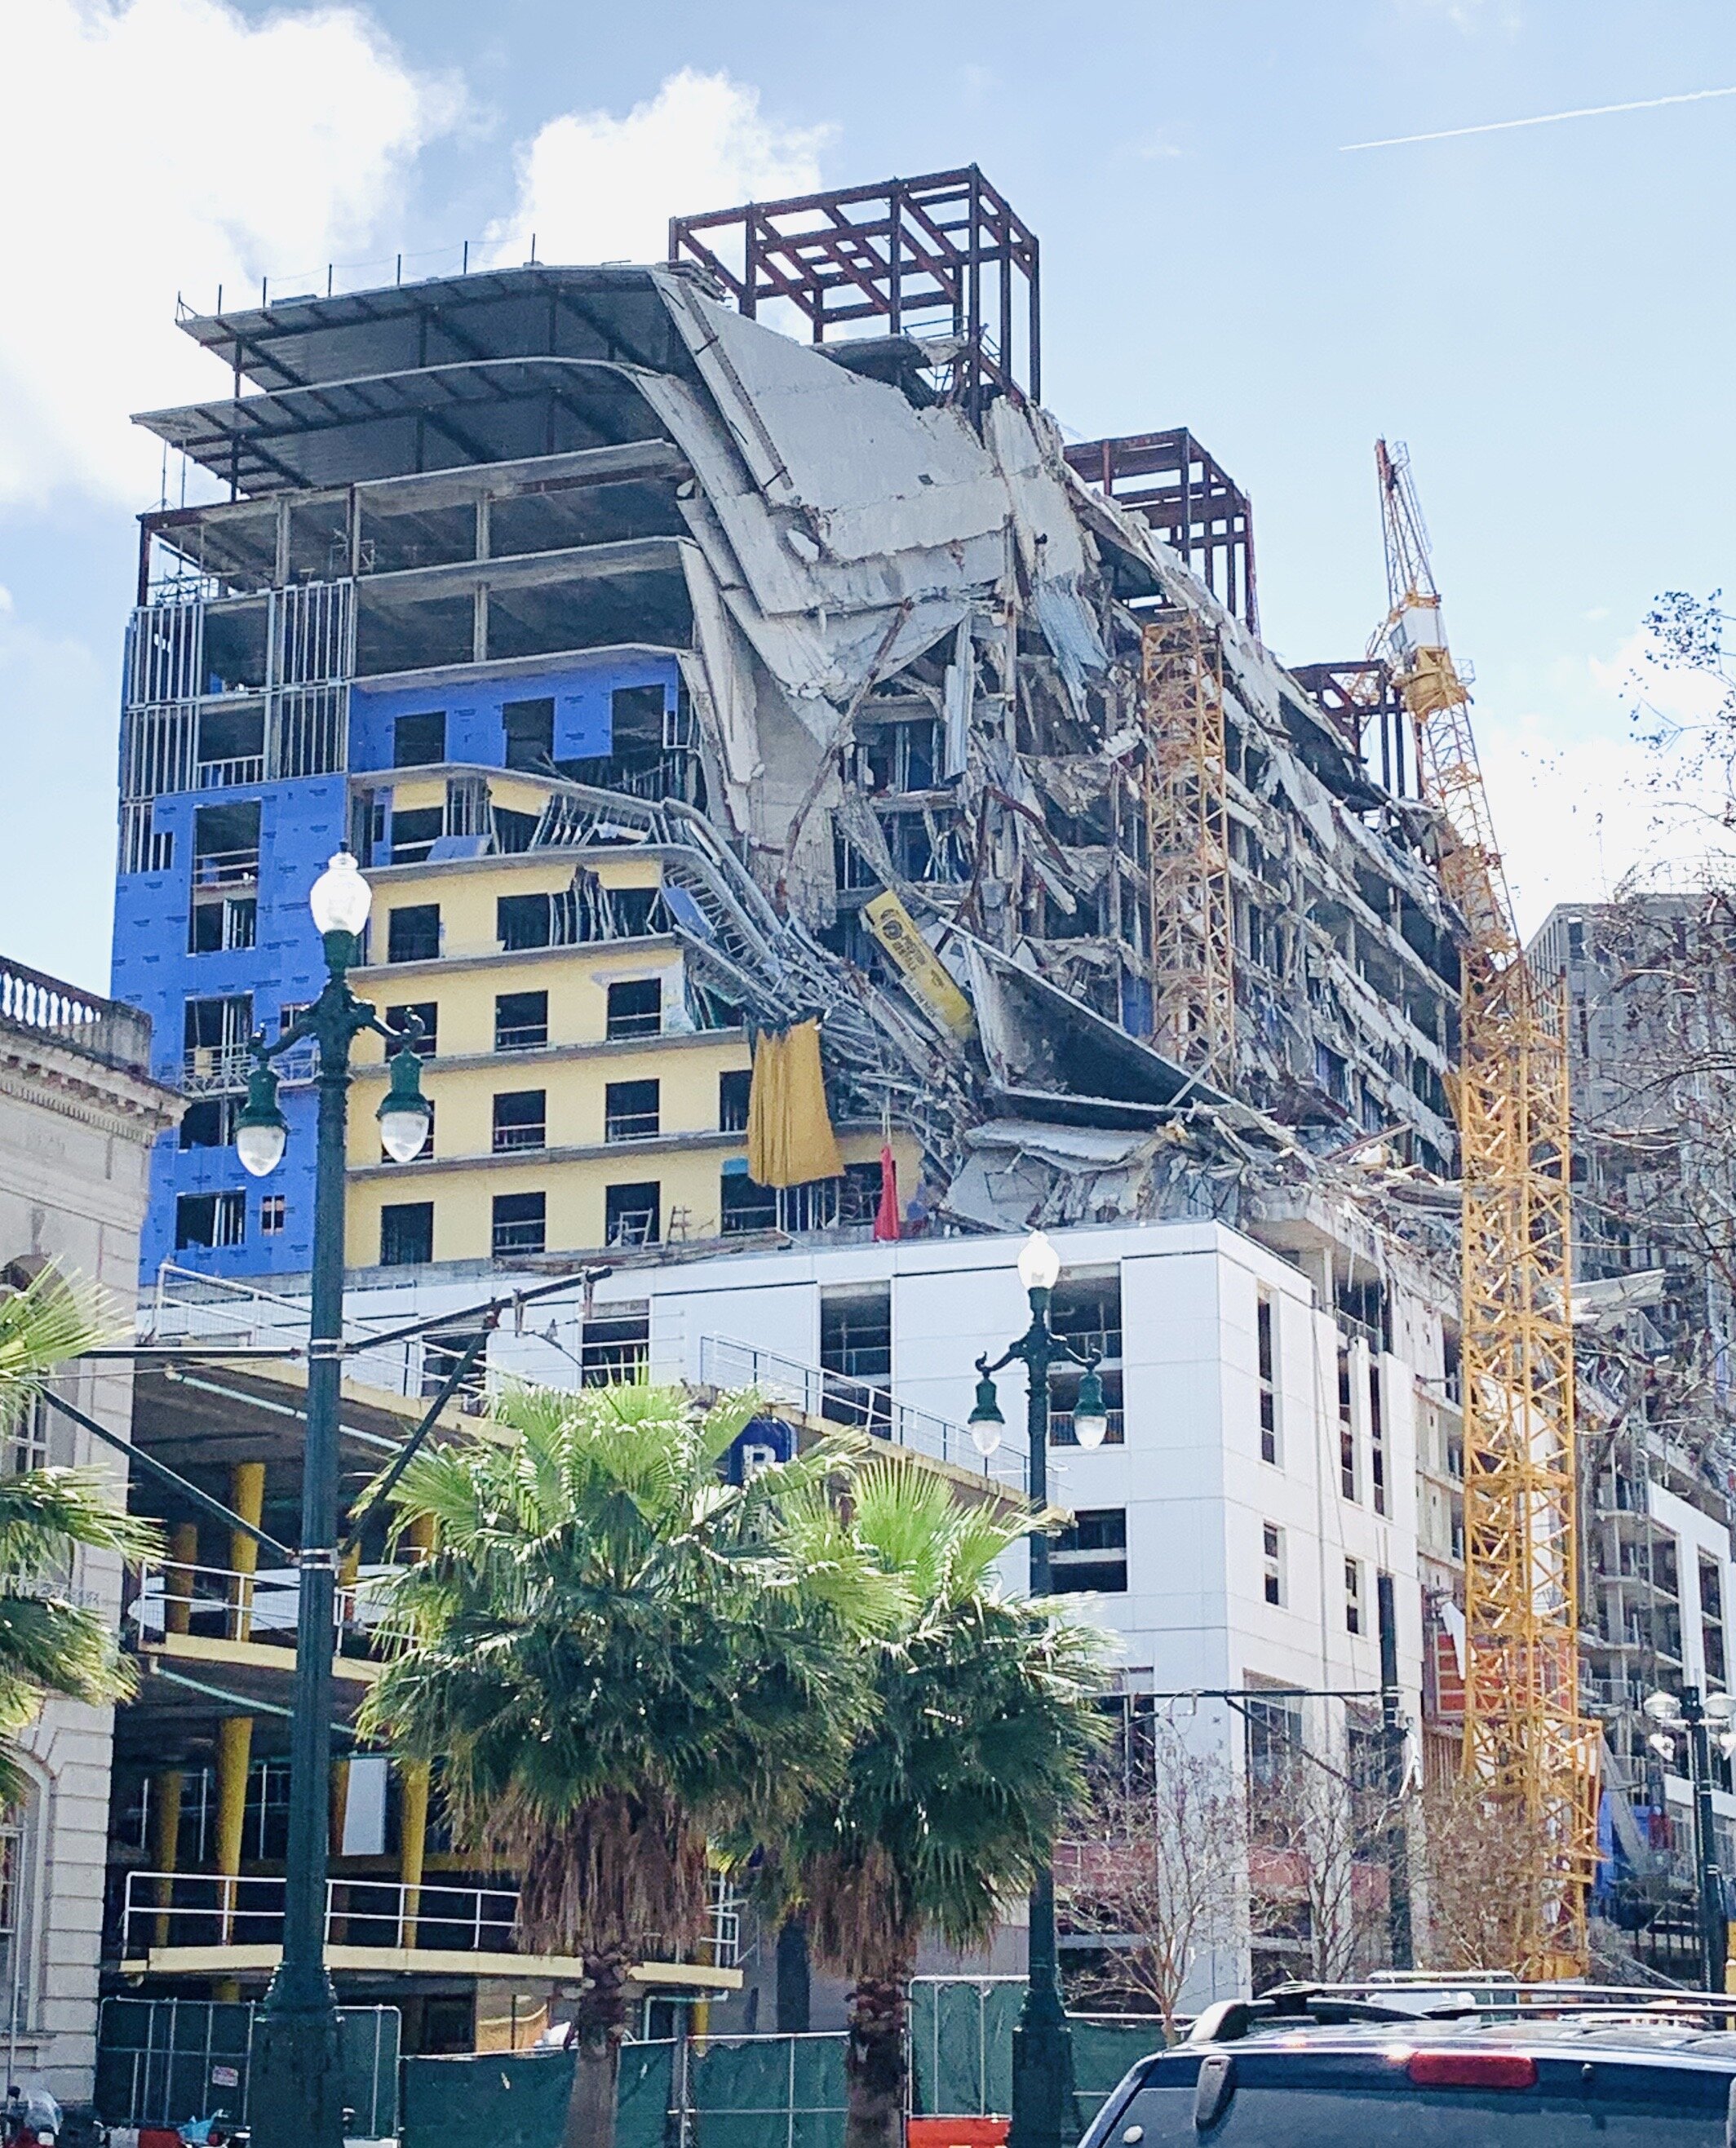  New Orleans has had its share of trouble lately. In October 2019, a partially collapsed construction project left 2 dead and several injured.. Today the building is still too unstable to recover the remains of the two  men that died.  A yellow tarp 